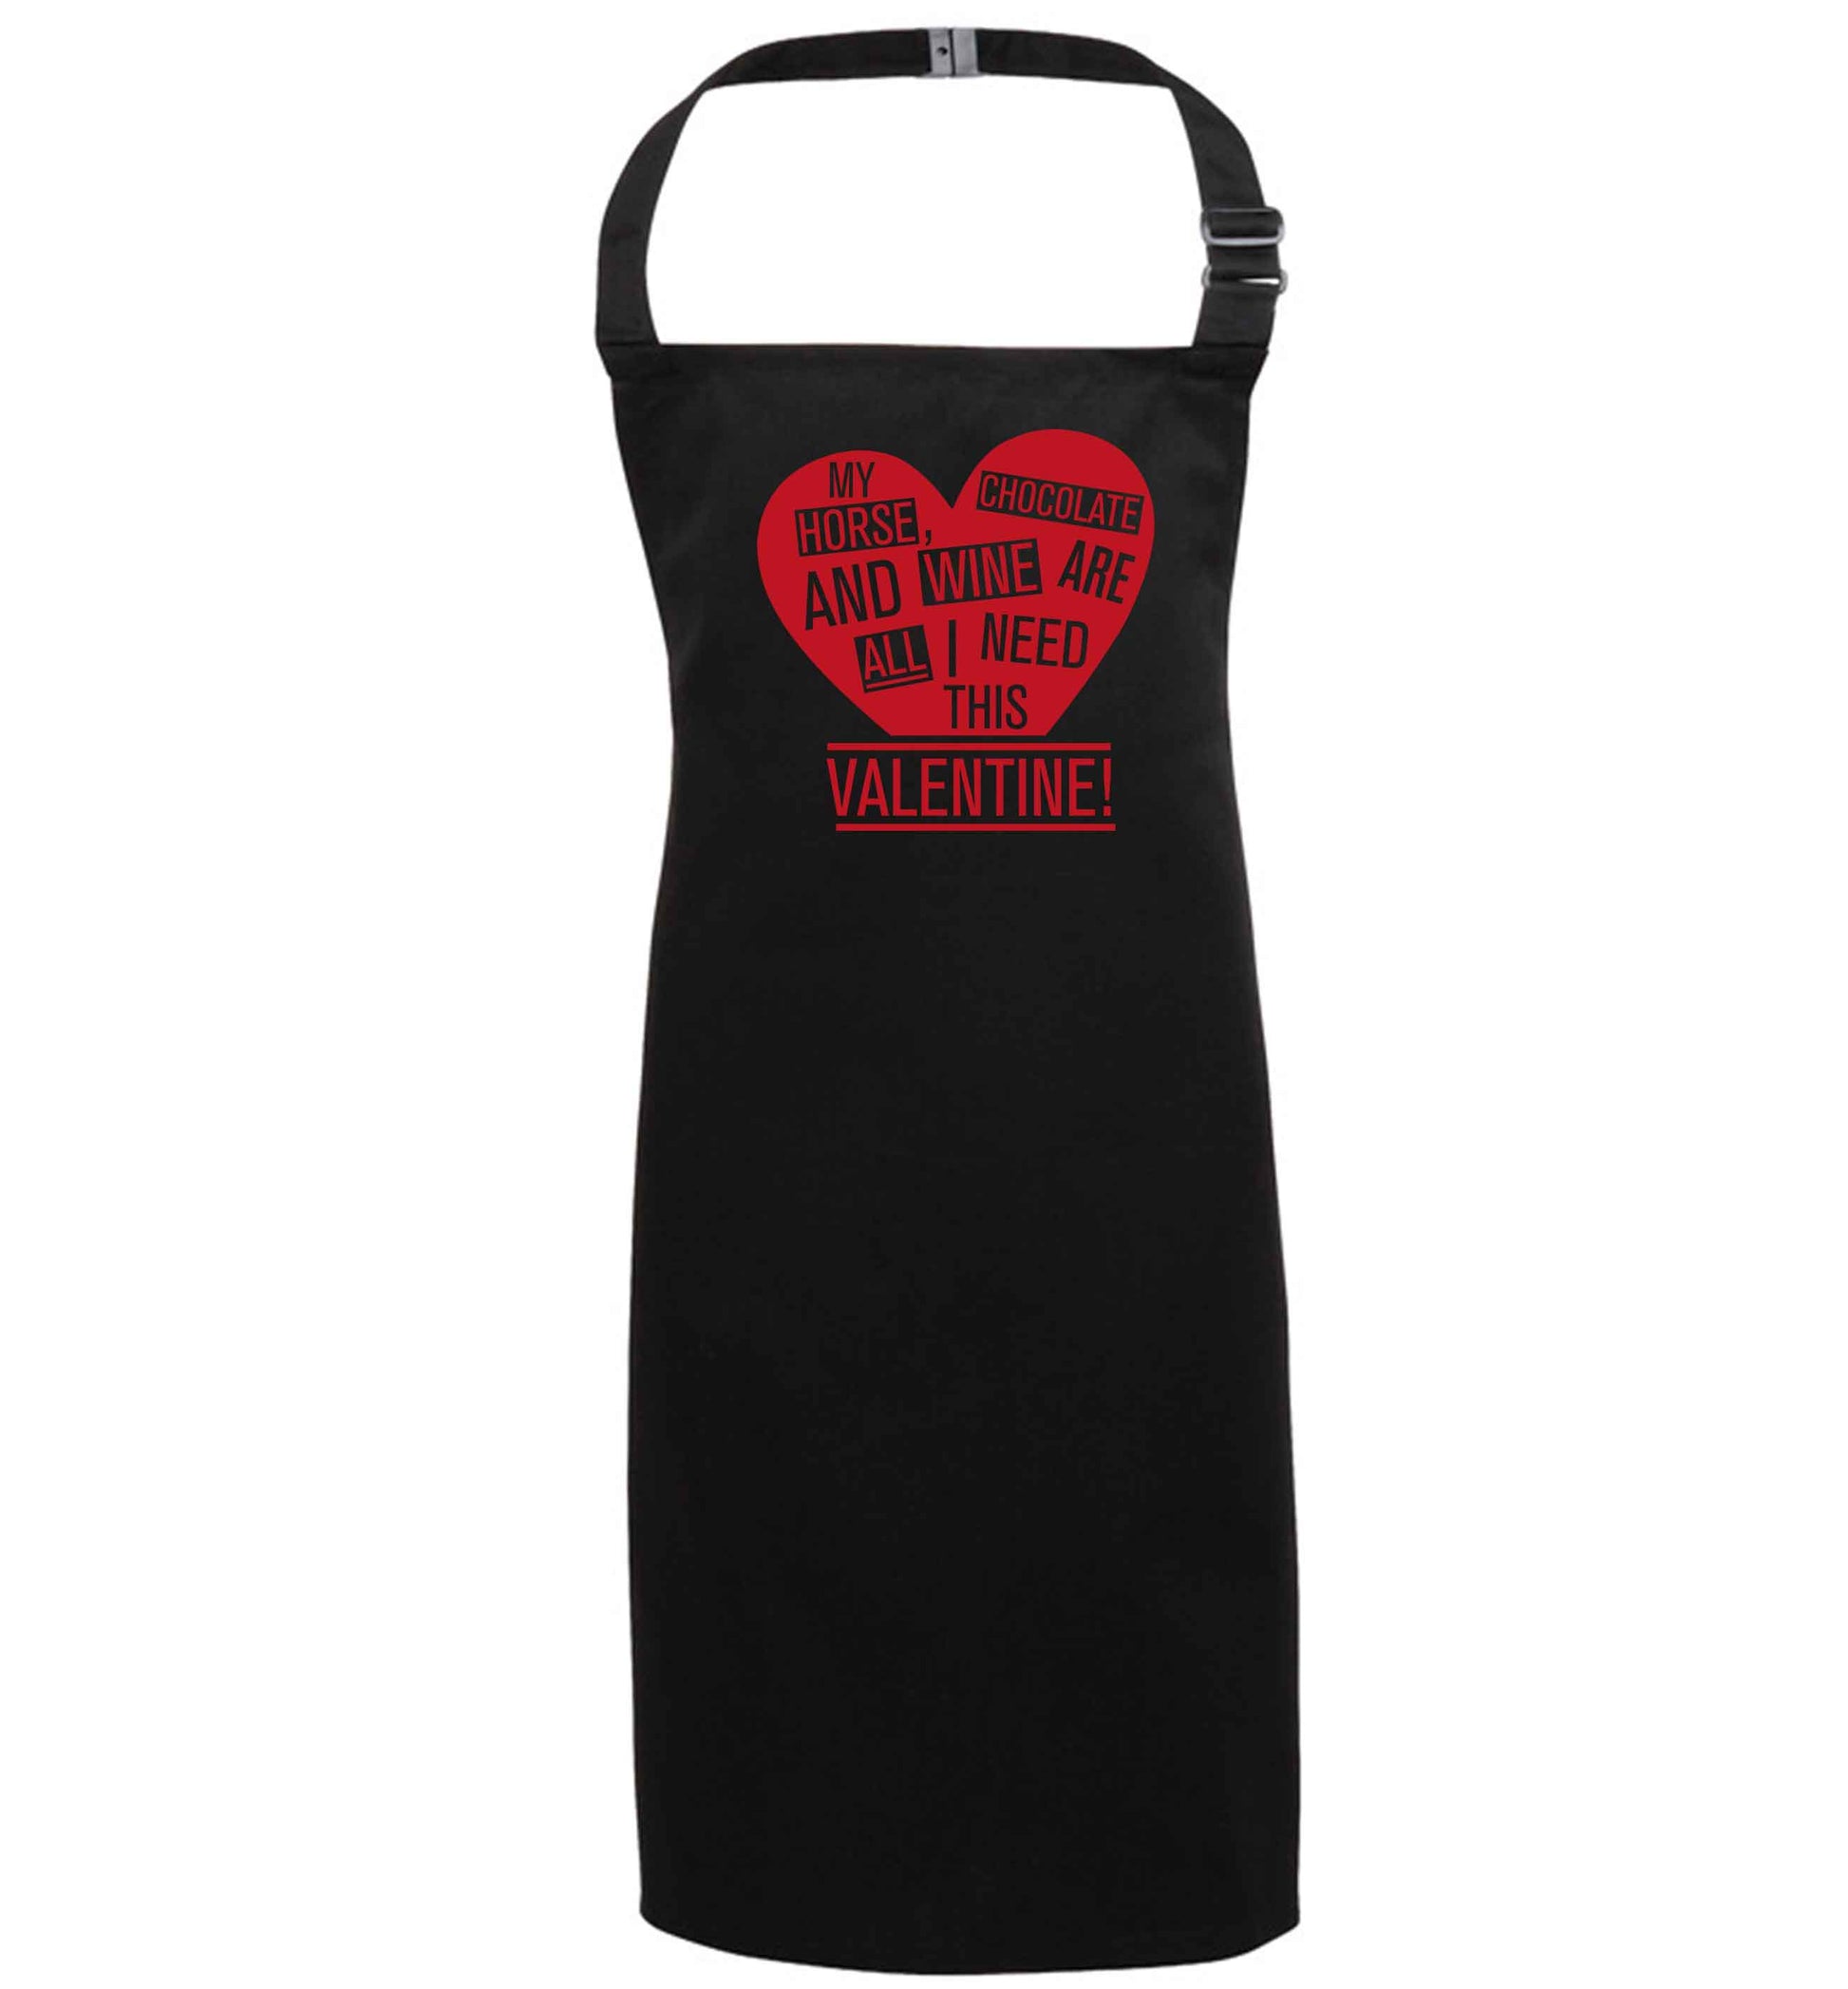 My horse chocolate and wine are all I need this valentine black apron 7-10 years